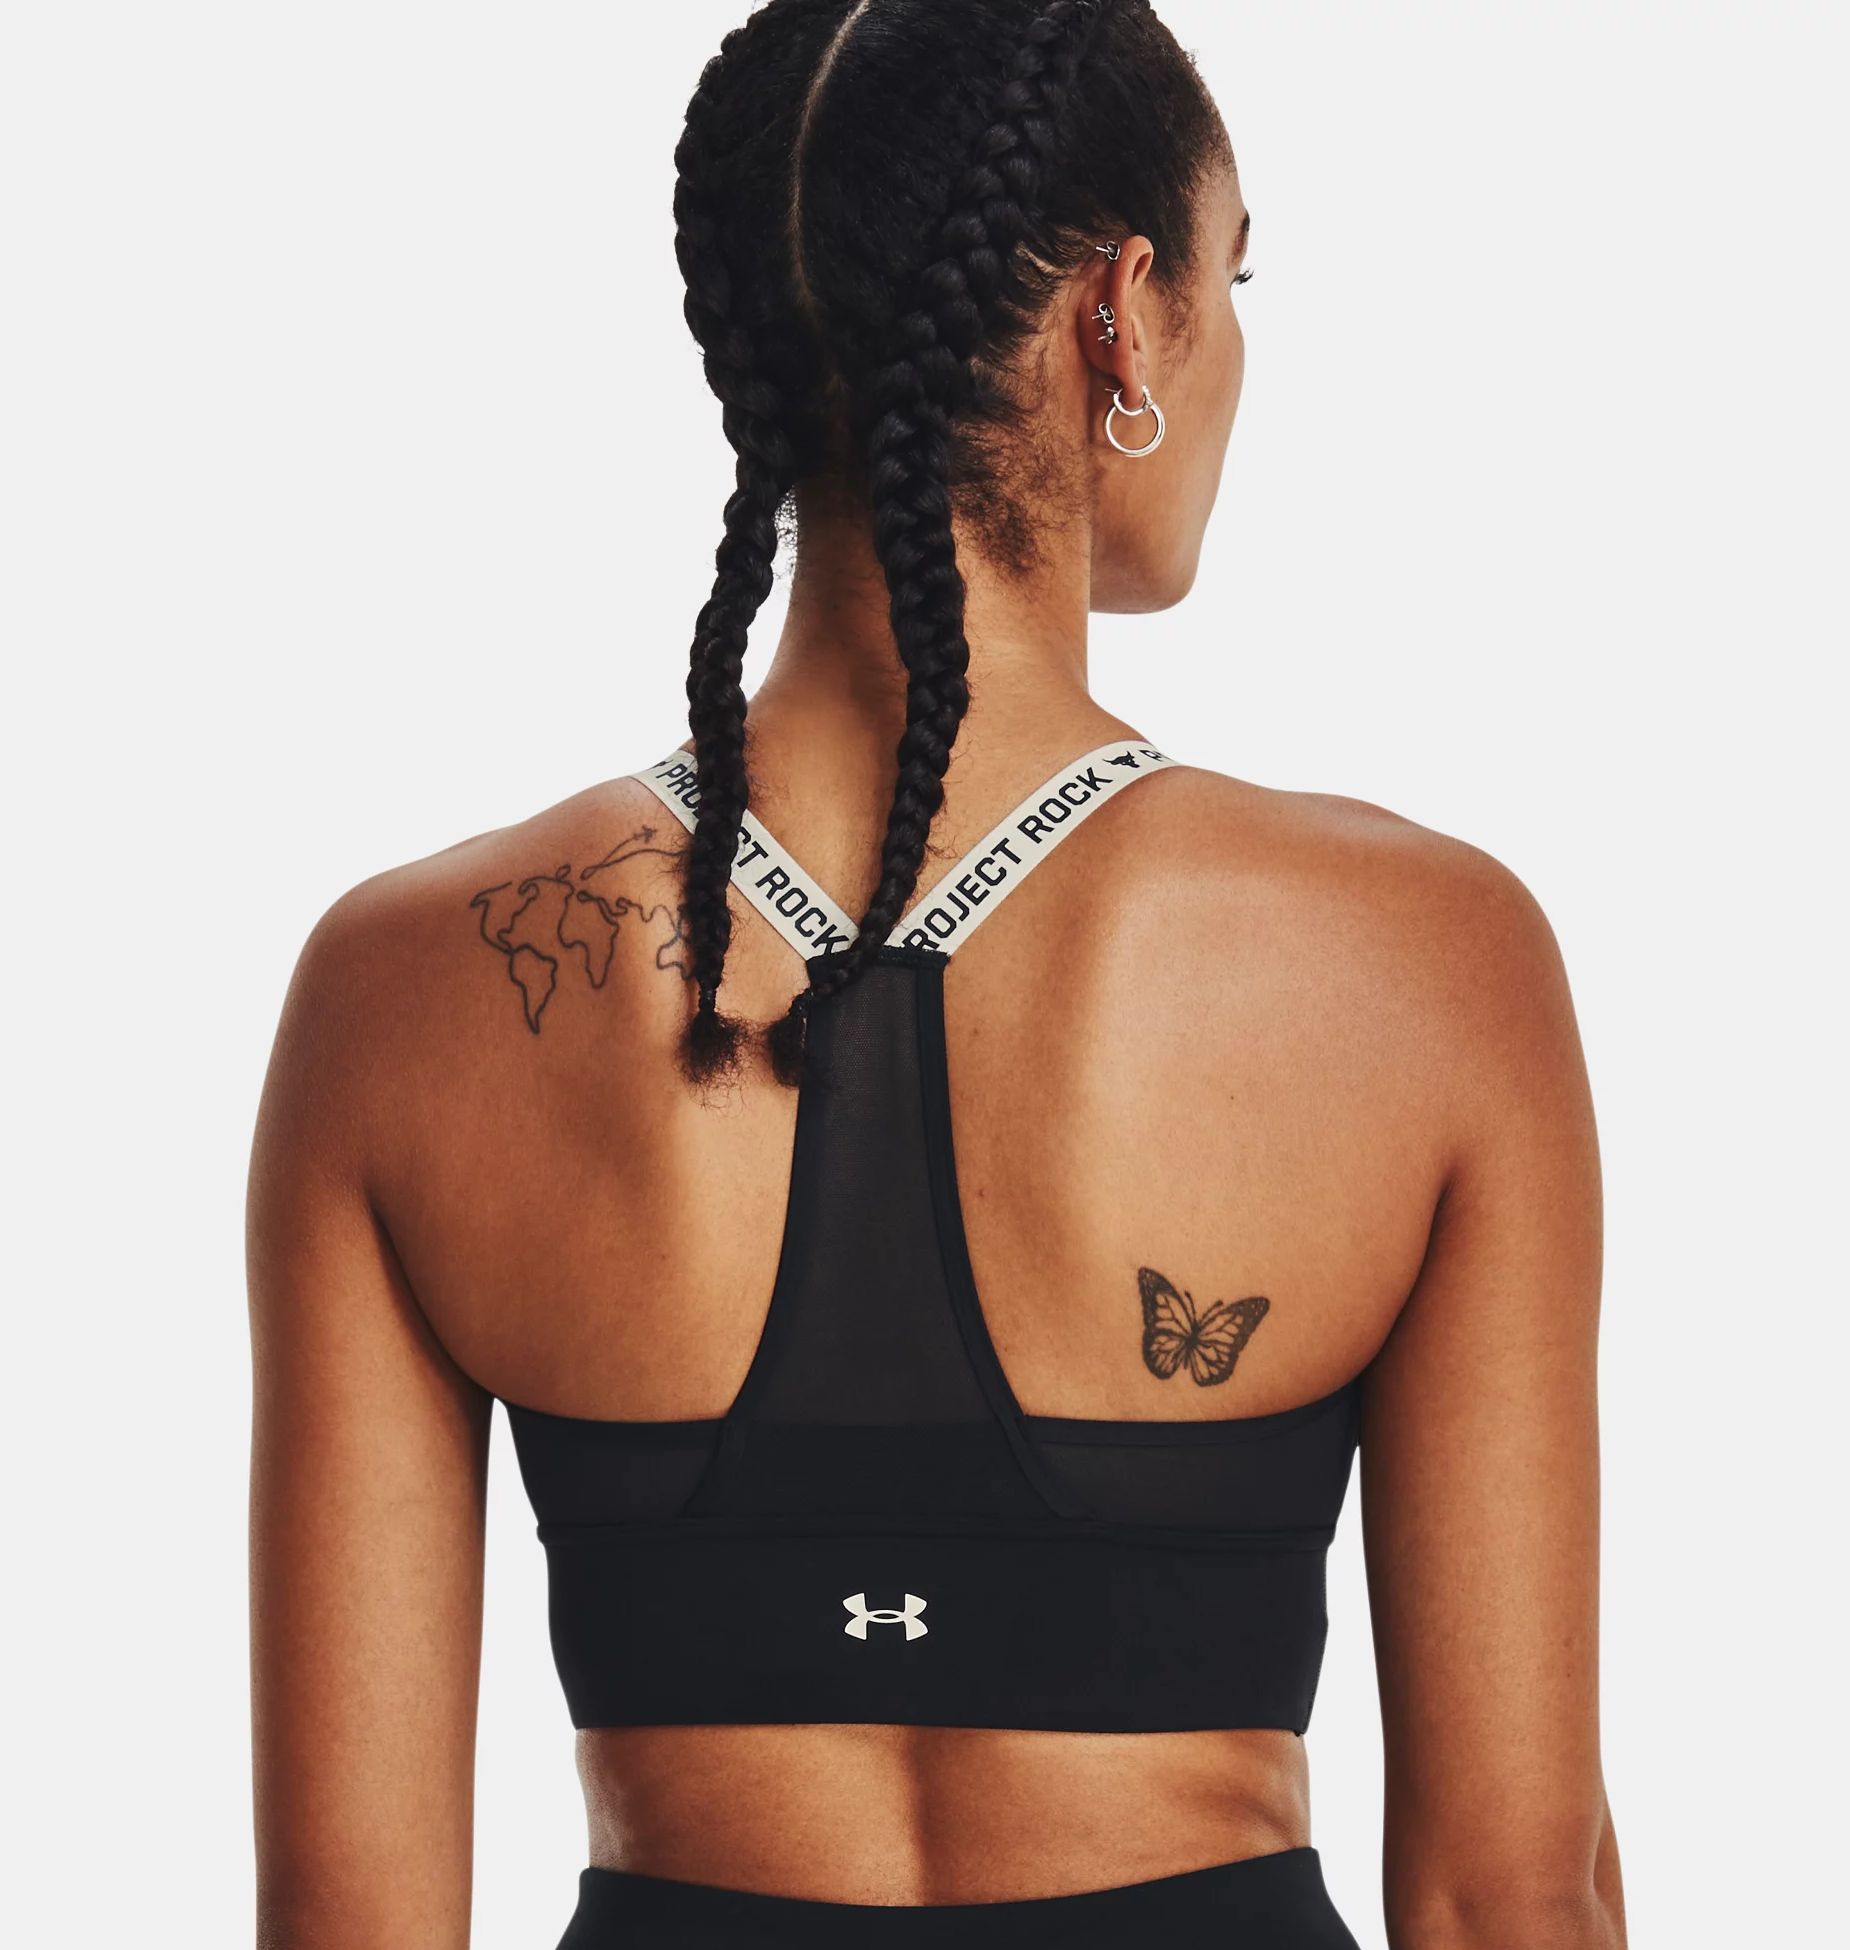 Bustiere -  under armour Project Rock Infinity Mid Sports Bra